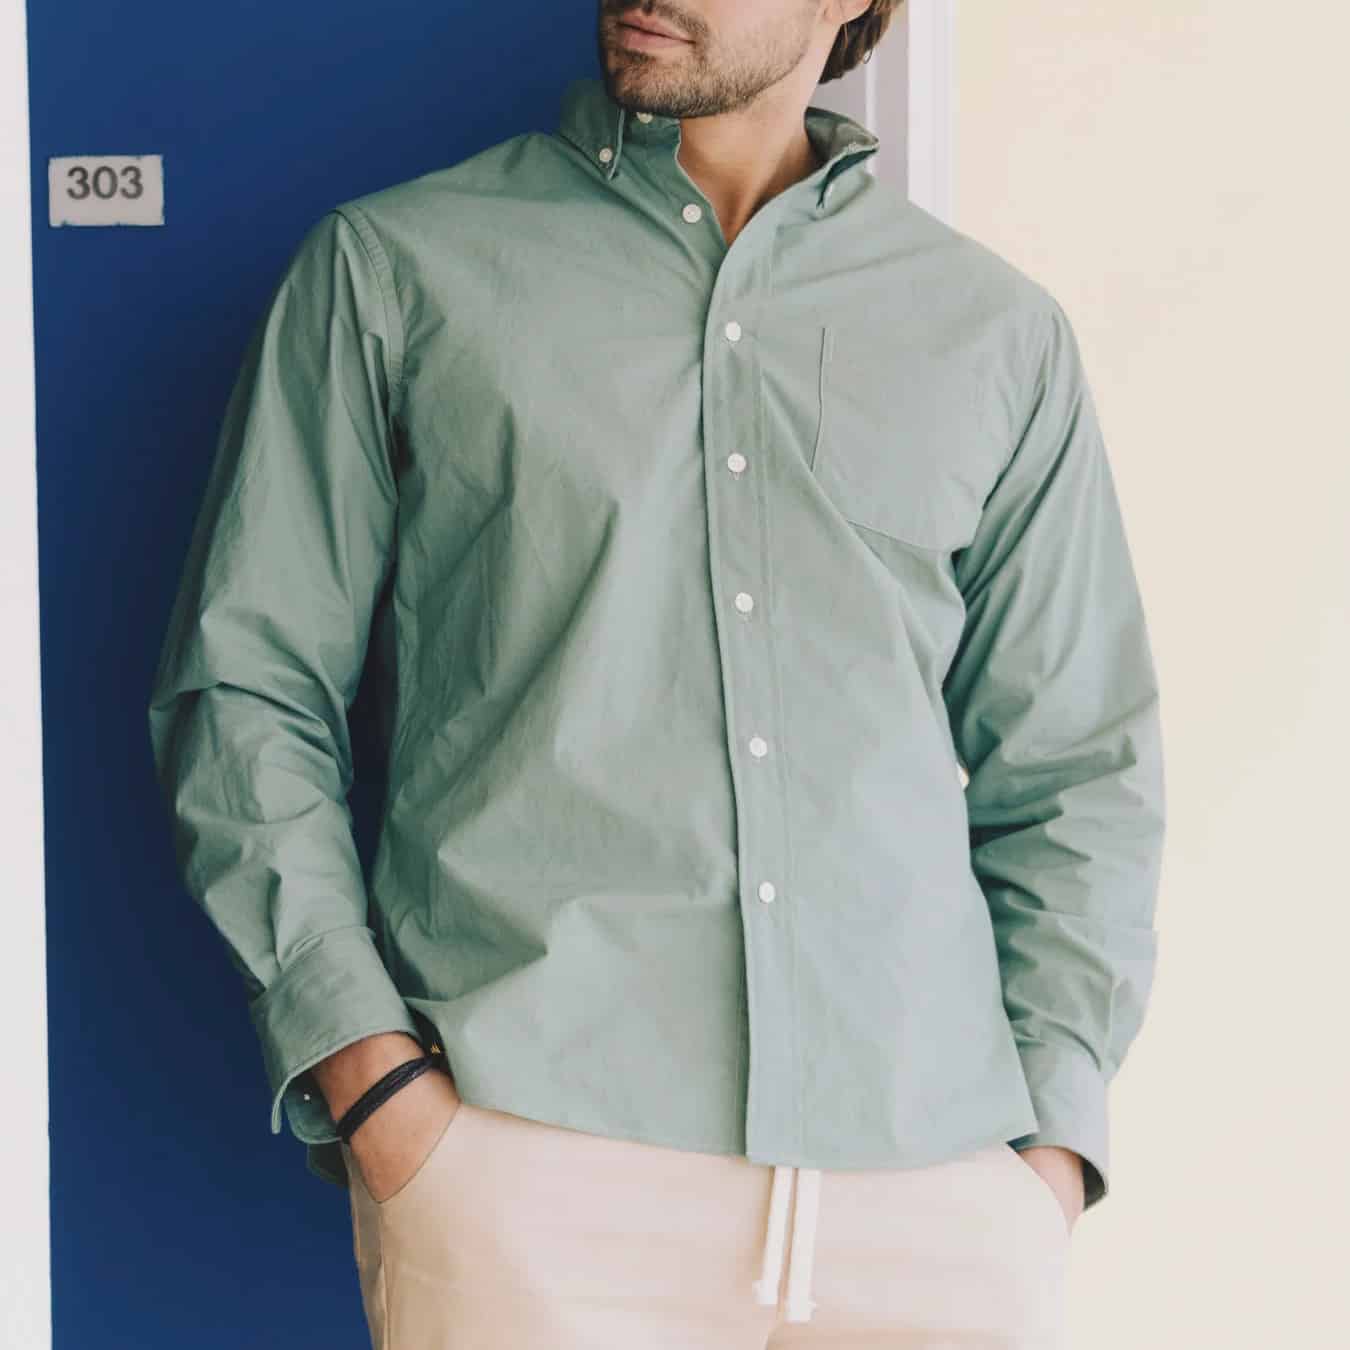 25 Cool Men's Clothing Brands Made in the USA